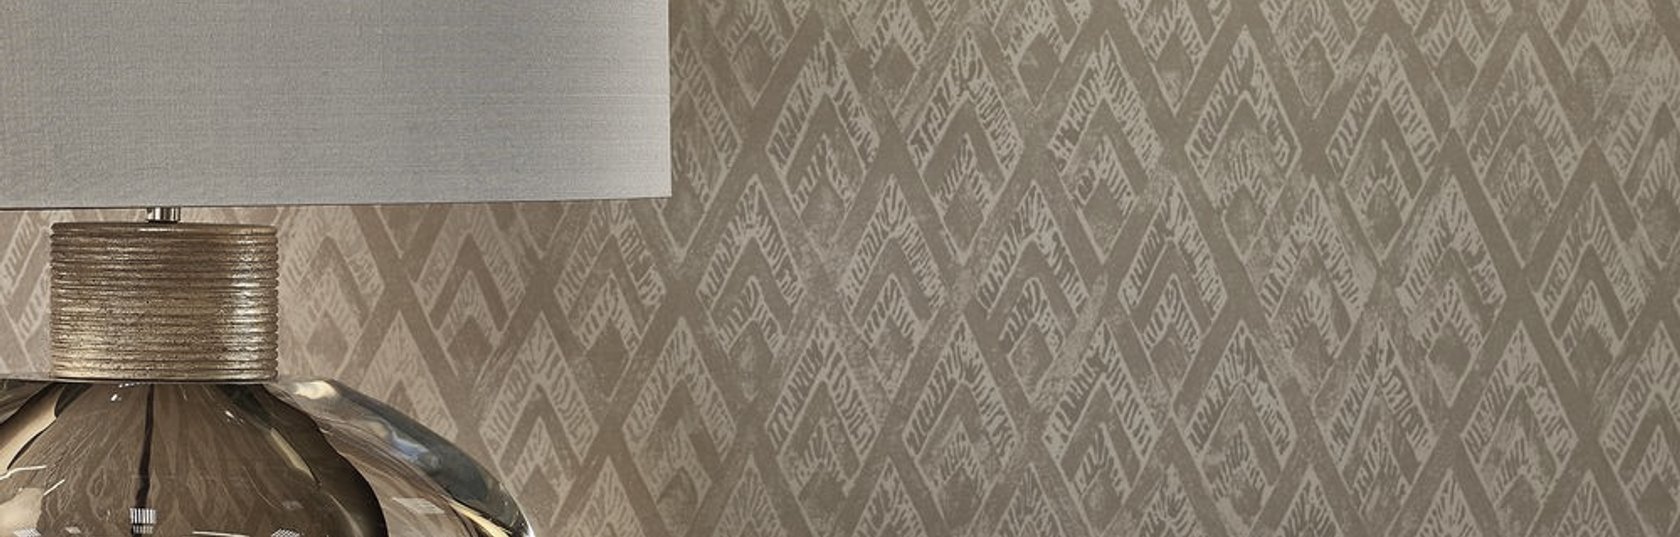 How to choose wallpaper